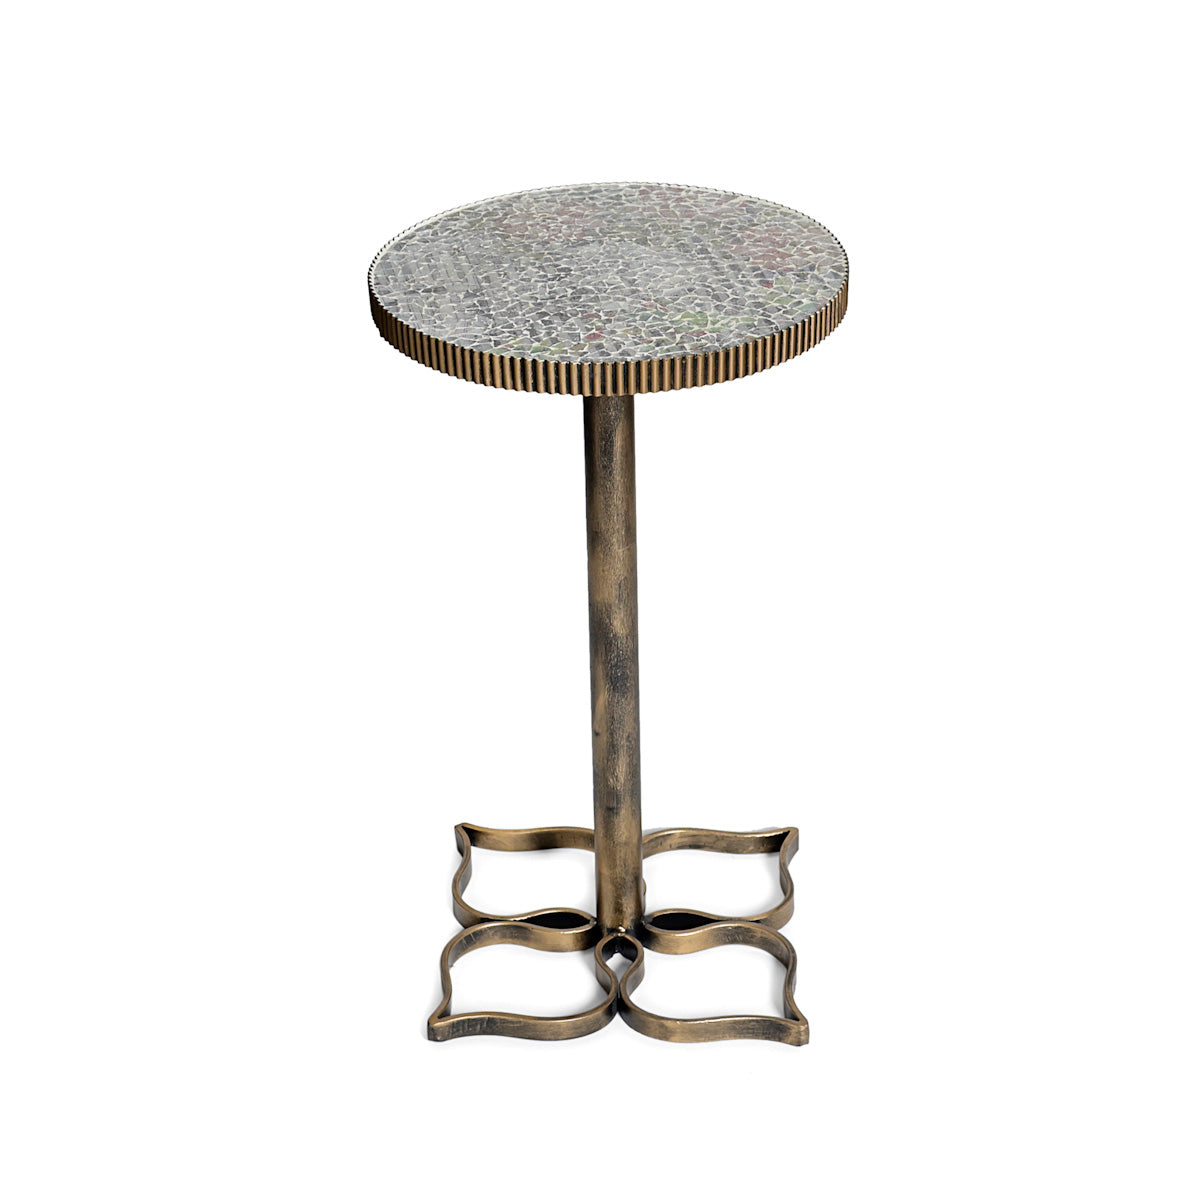 Mosaic Petal Rustic Round Tables